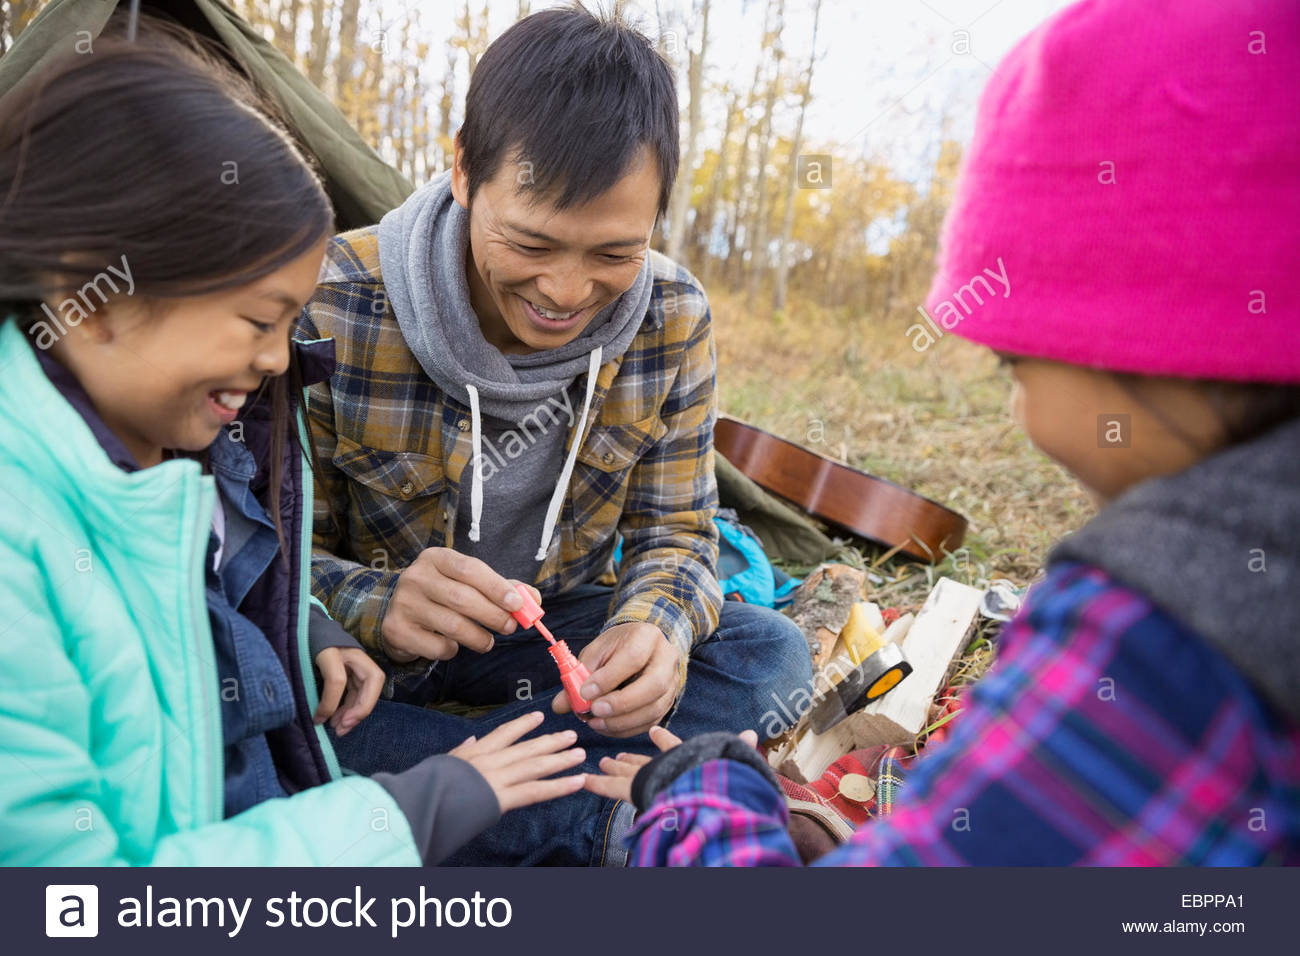 Father giving daughter manicure at campsite Stock Photo